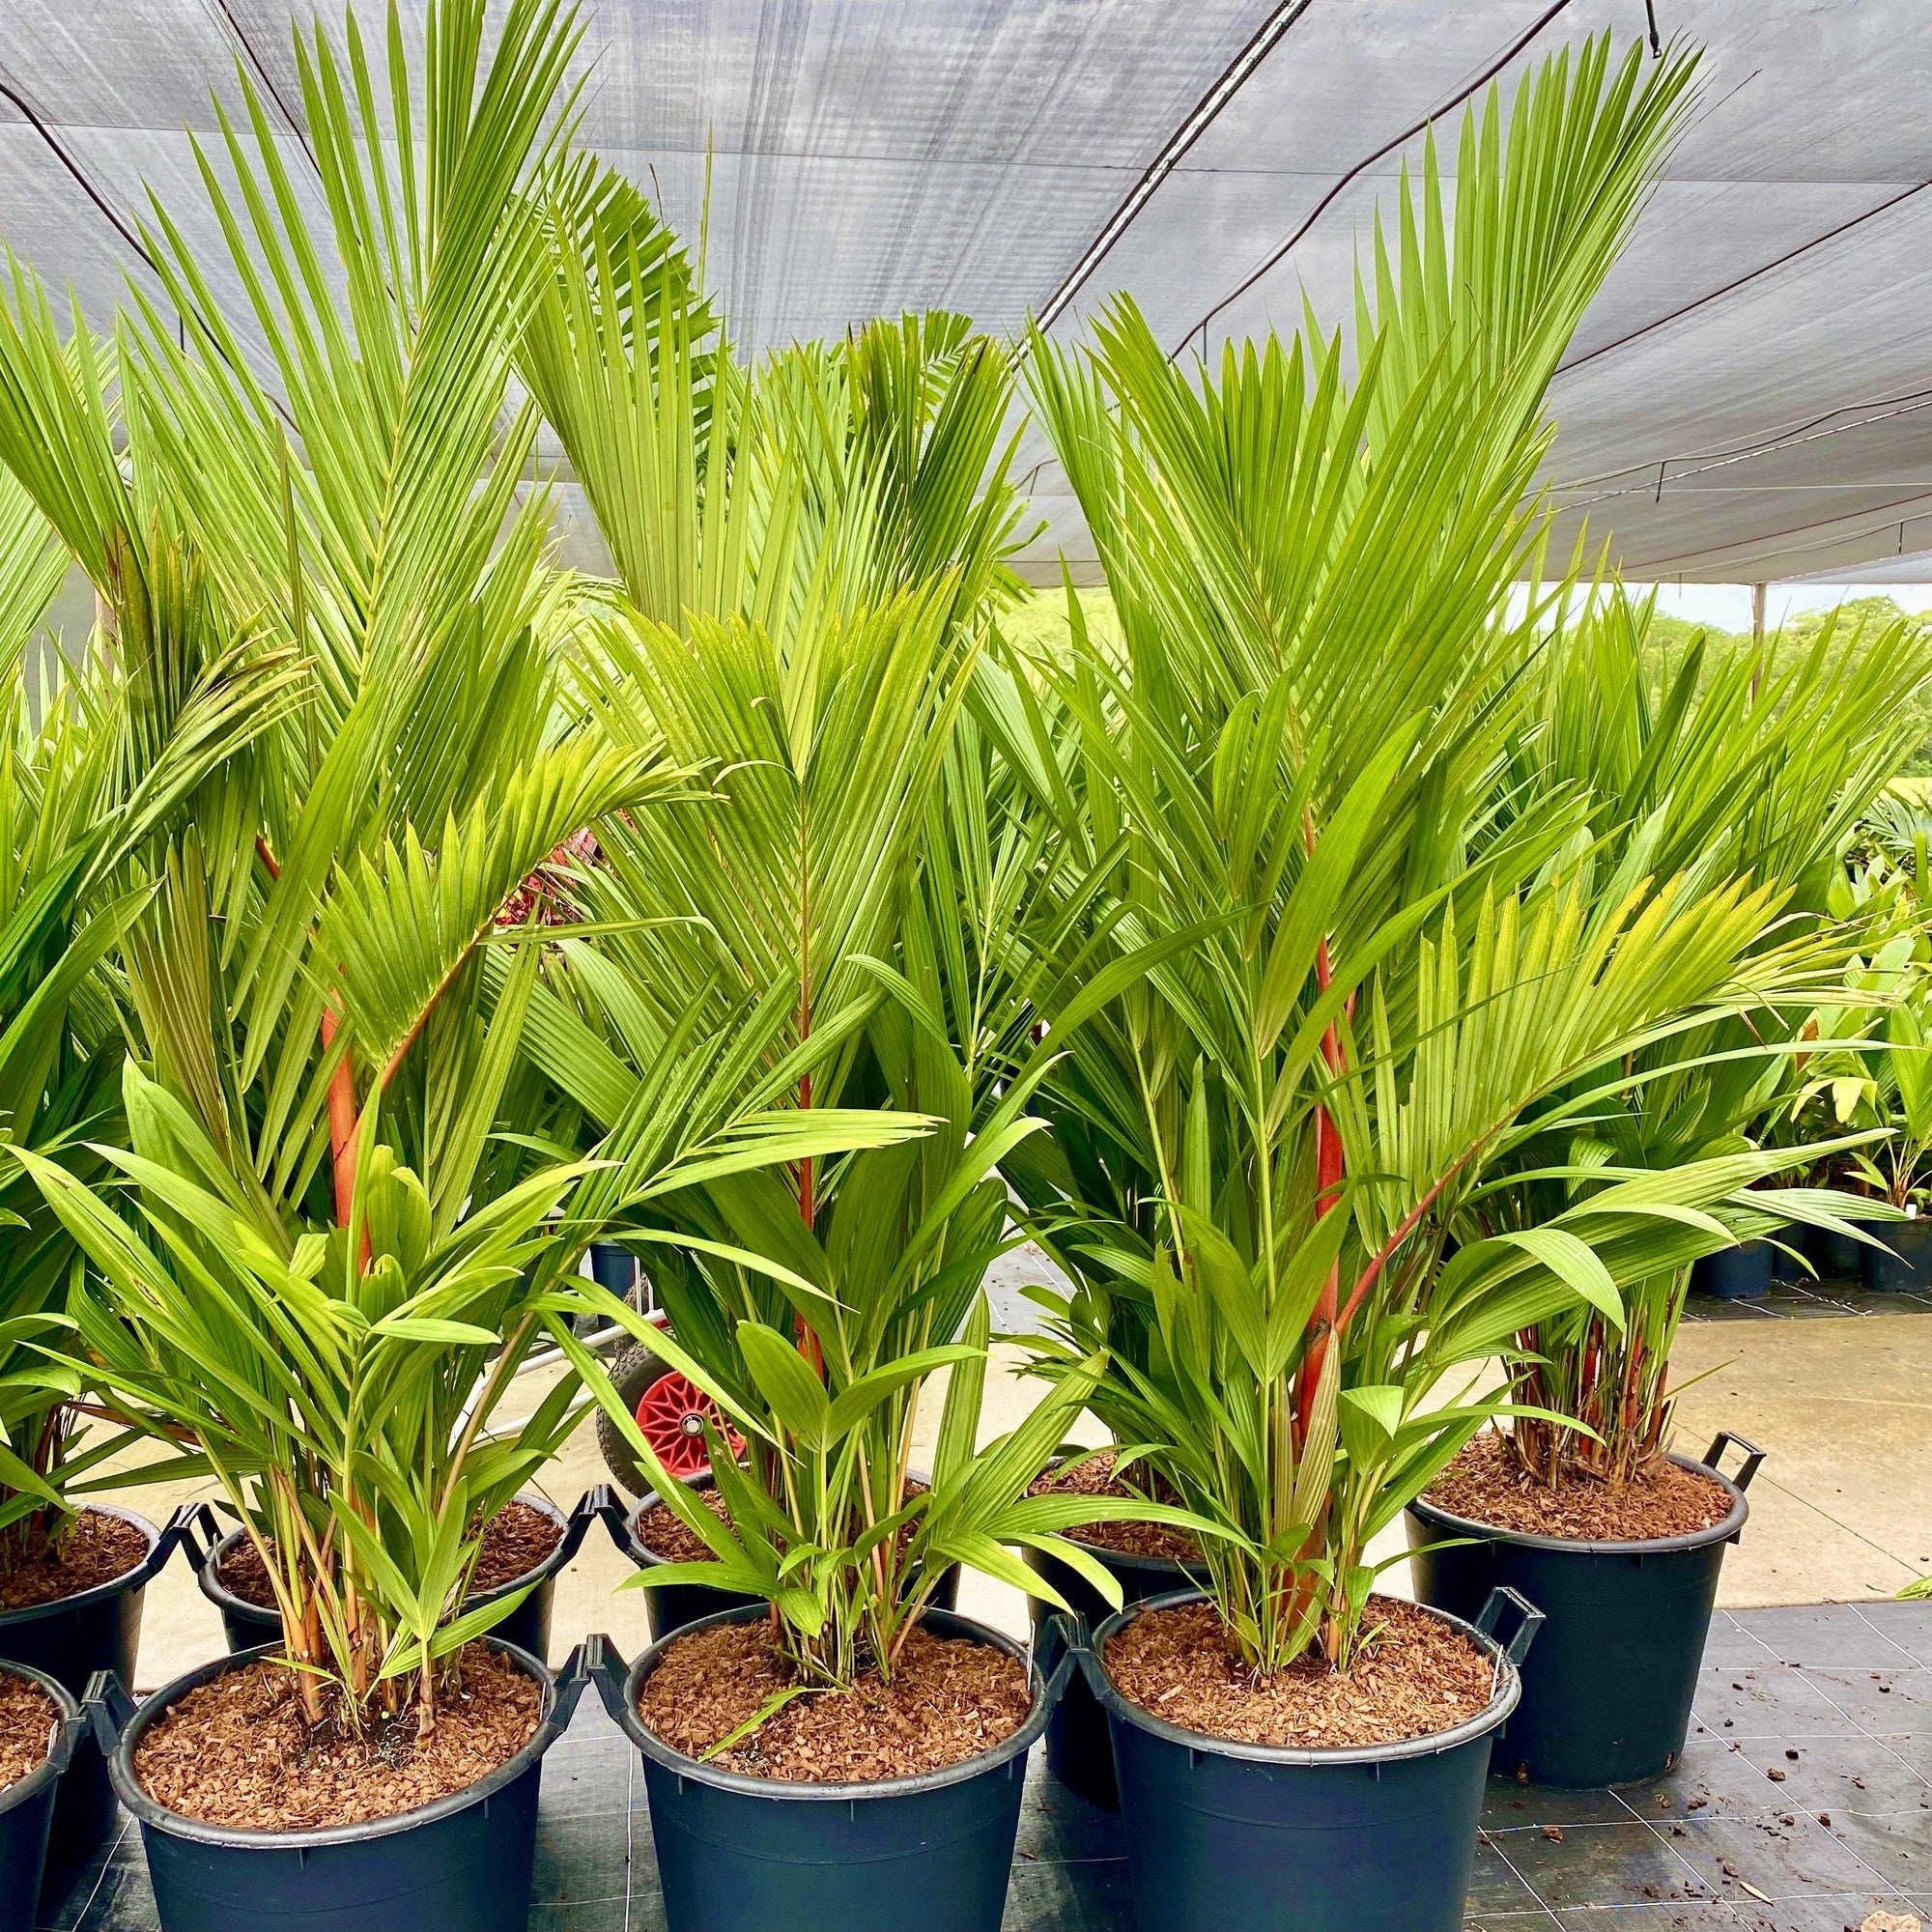 The bright red crownshafts and leaf sheaths of this palm make it an outstanding addition to any tropical garden